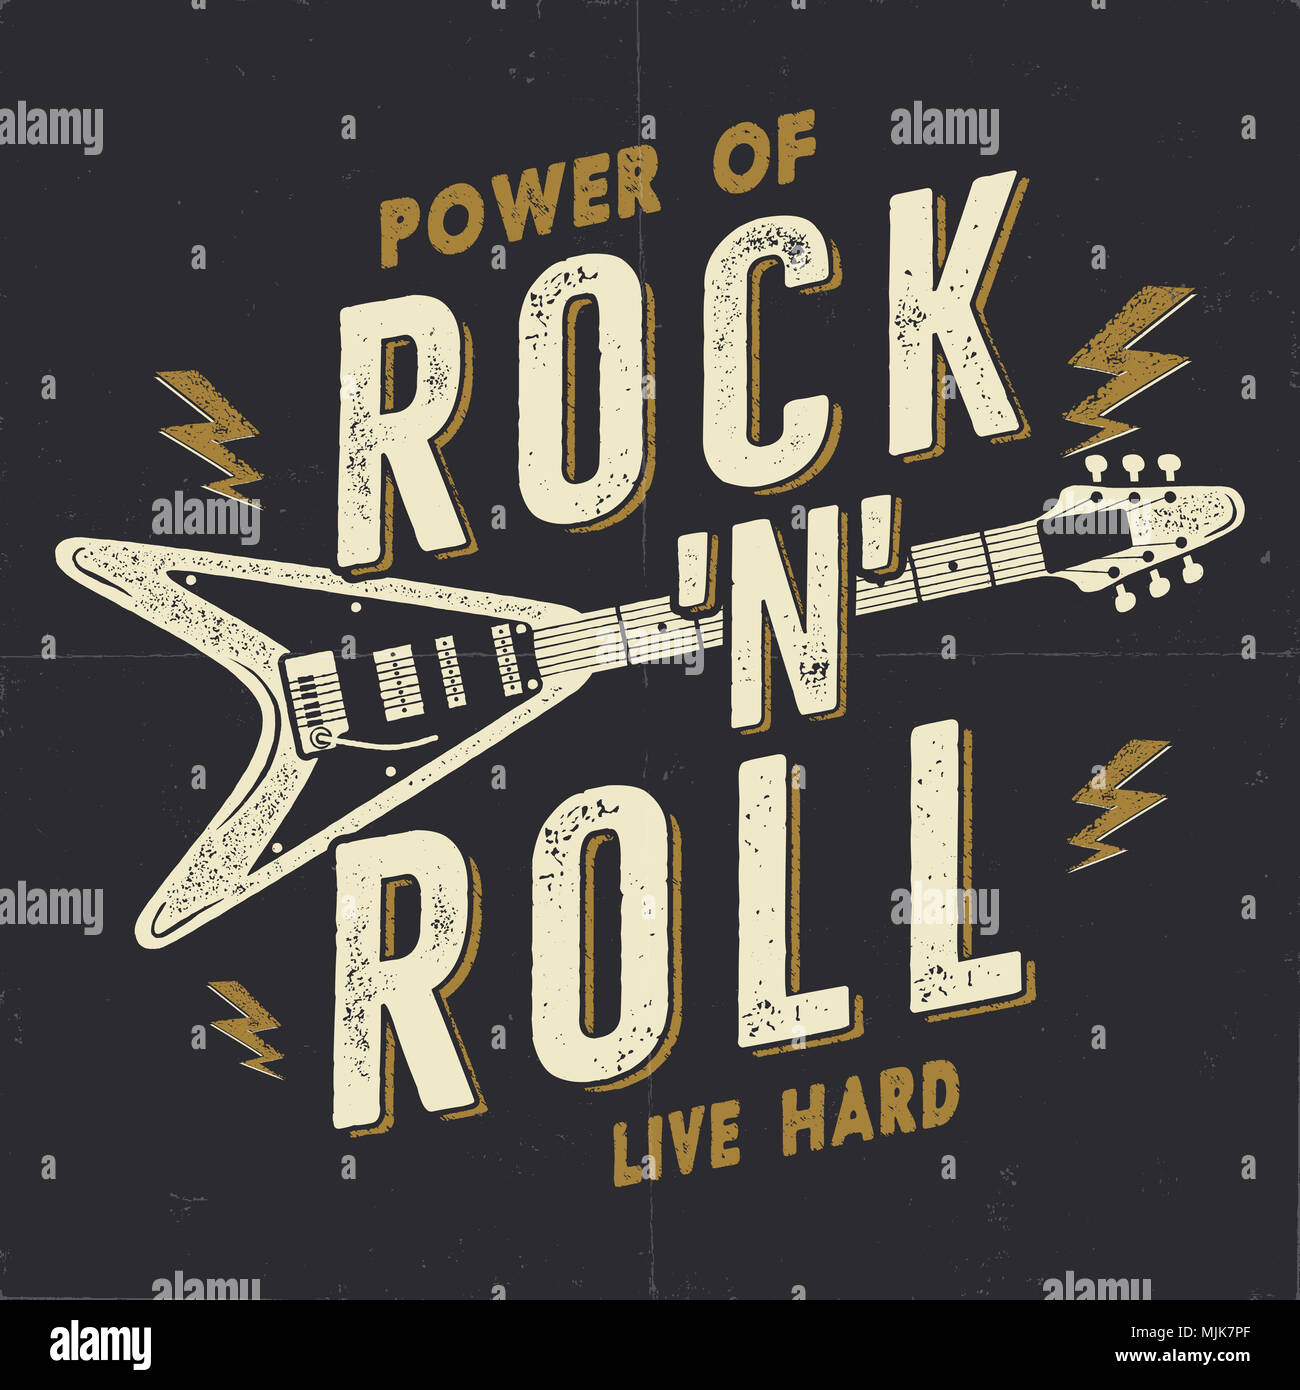 Vintage Hand Drawn Rock n Roll Poster, Rock Music Poster. Hard Music Tee Graphics Design. Rock Music T-Shirt. Power of Rock n Roll quote. Stock retro wallpaper, emblem. Stock Photo